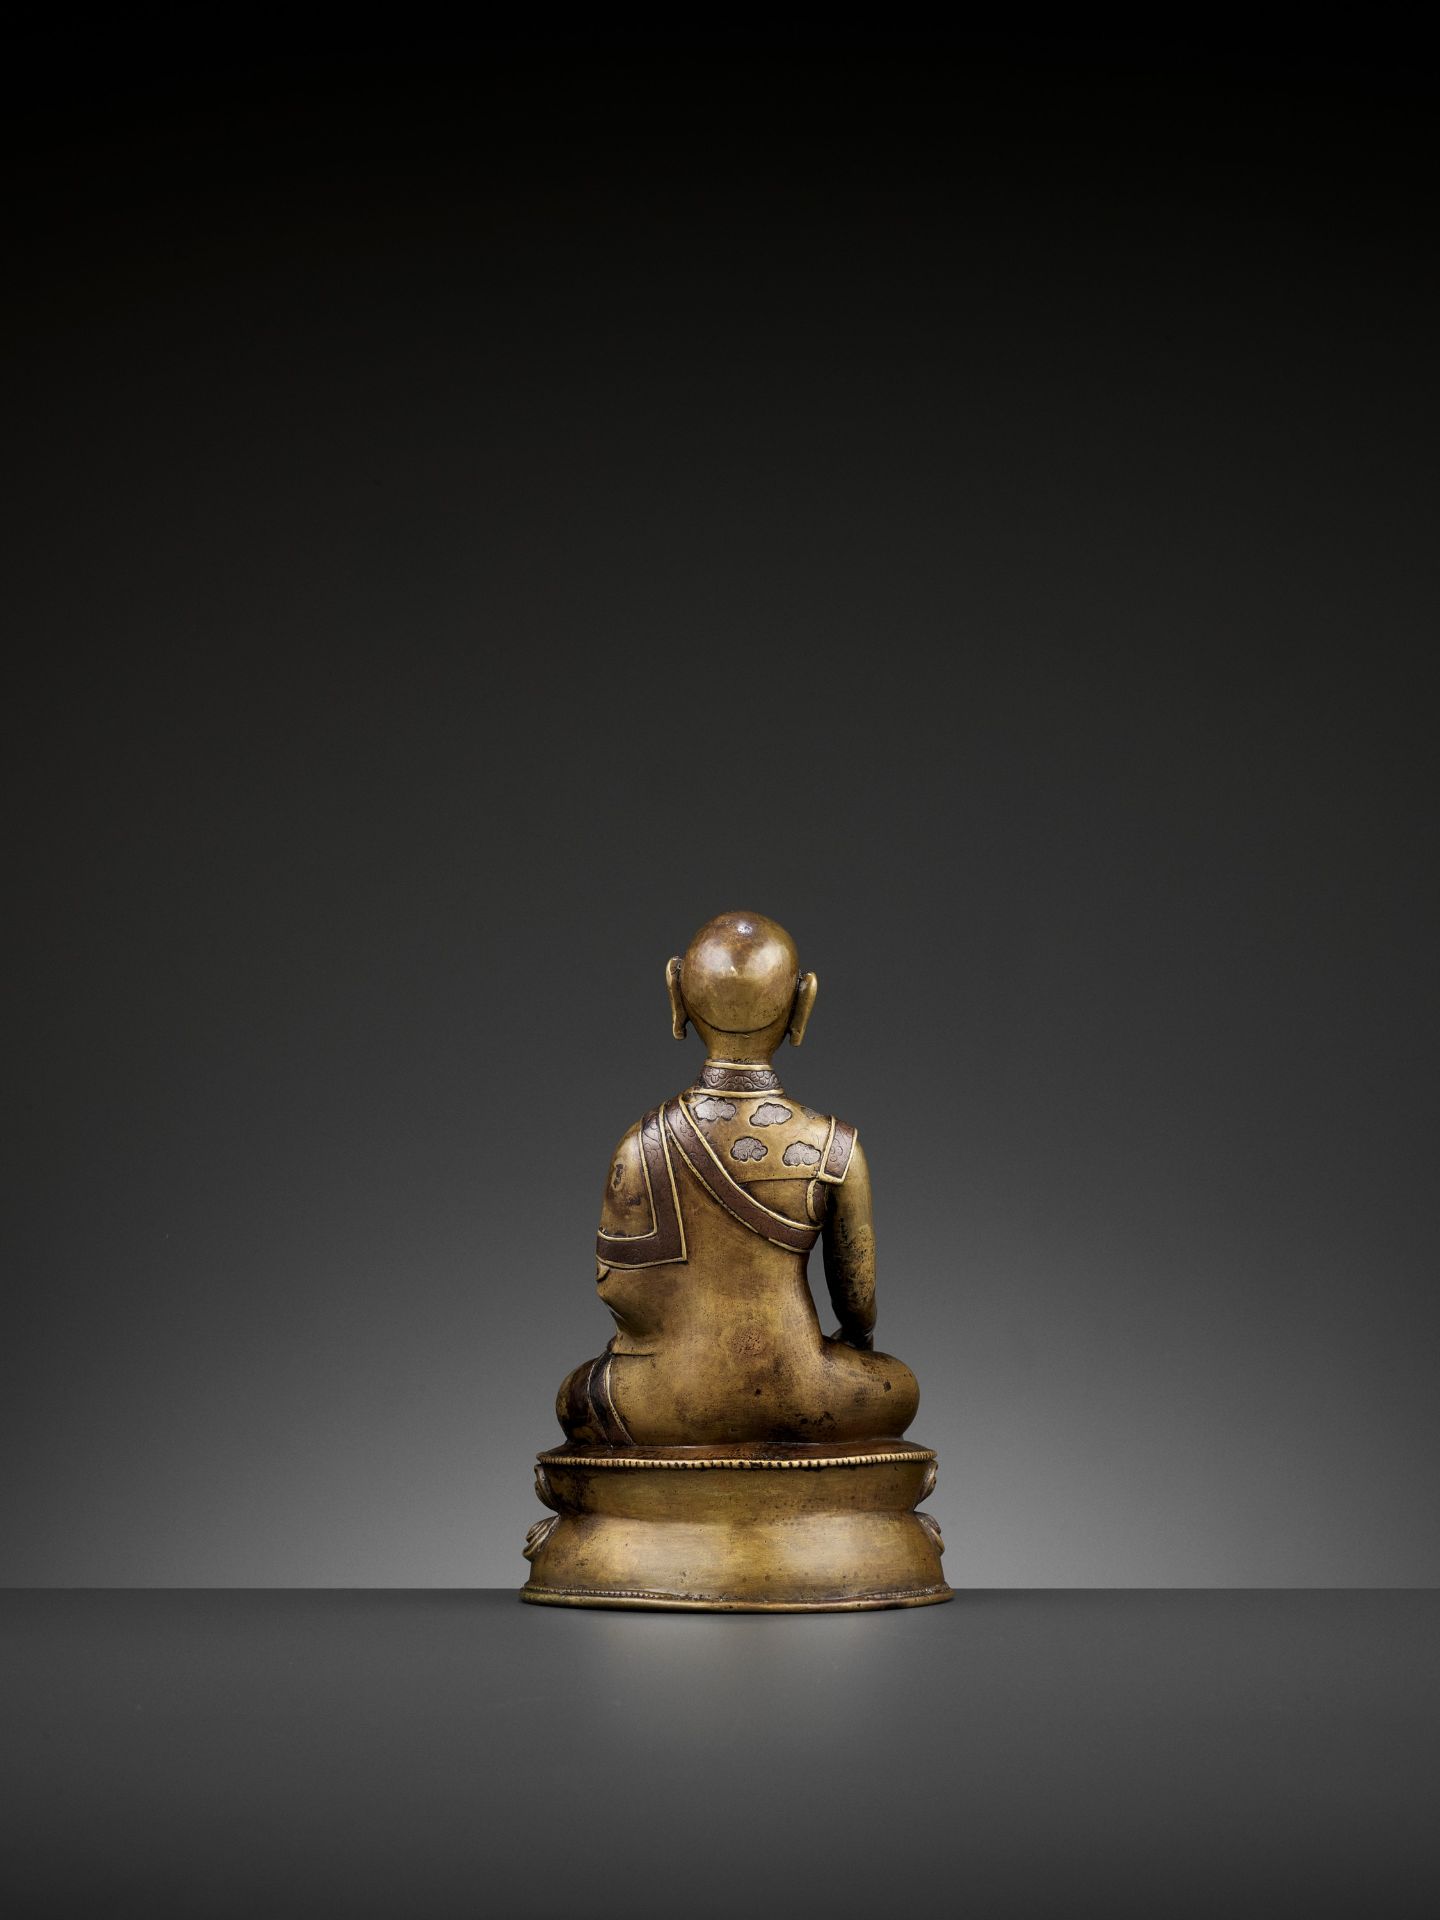 A PORTRAIT BRONZE OF A MONK, COPPER- AND SILVER-INLAID, 16TH-18TH CENTURY - Image 11 of 12